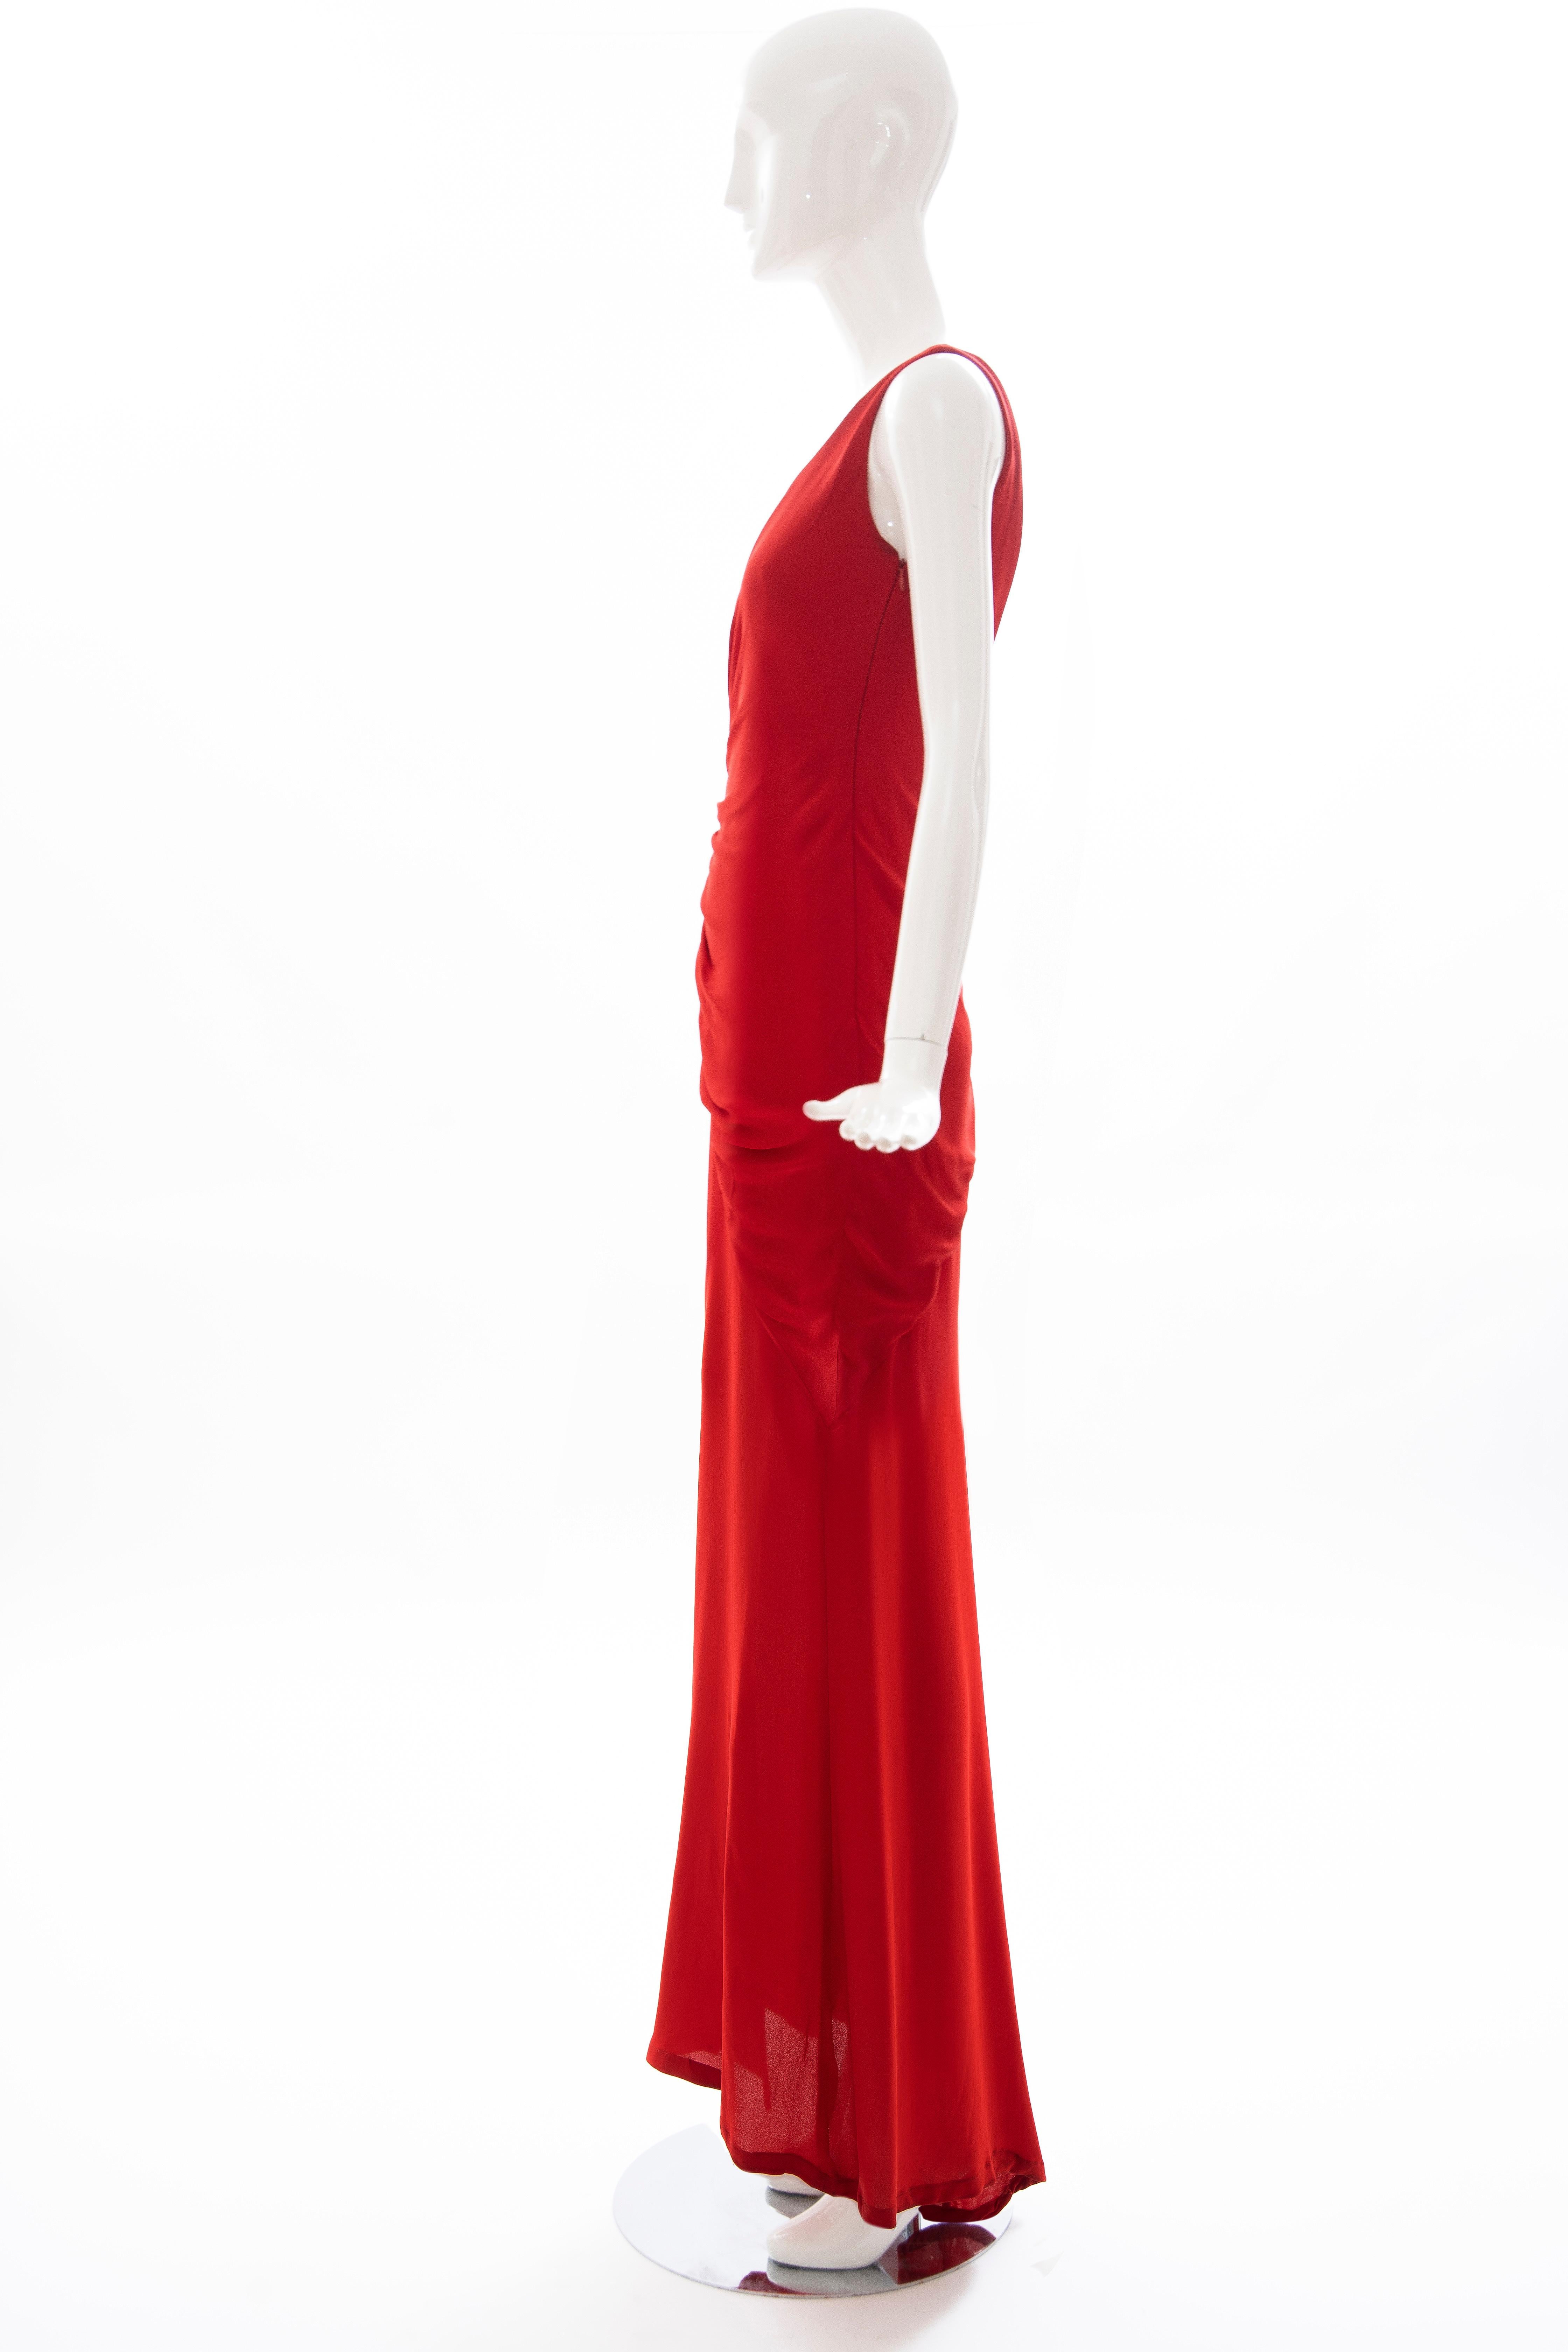 Valentino Runway Red Silk Crepe Evening Dress (Final Collection), Spring 2008 For Sale 7